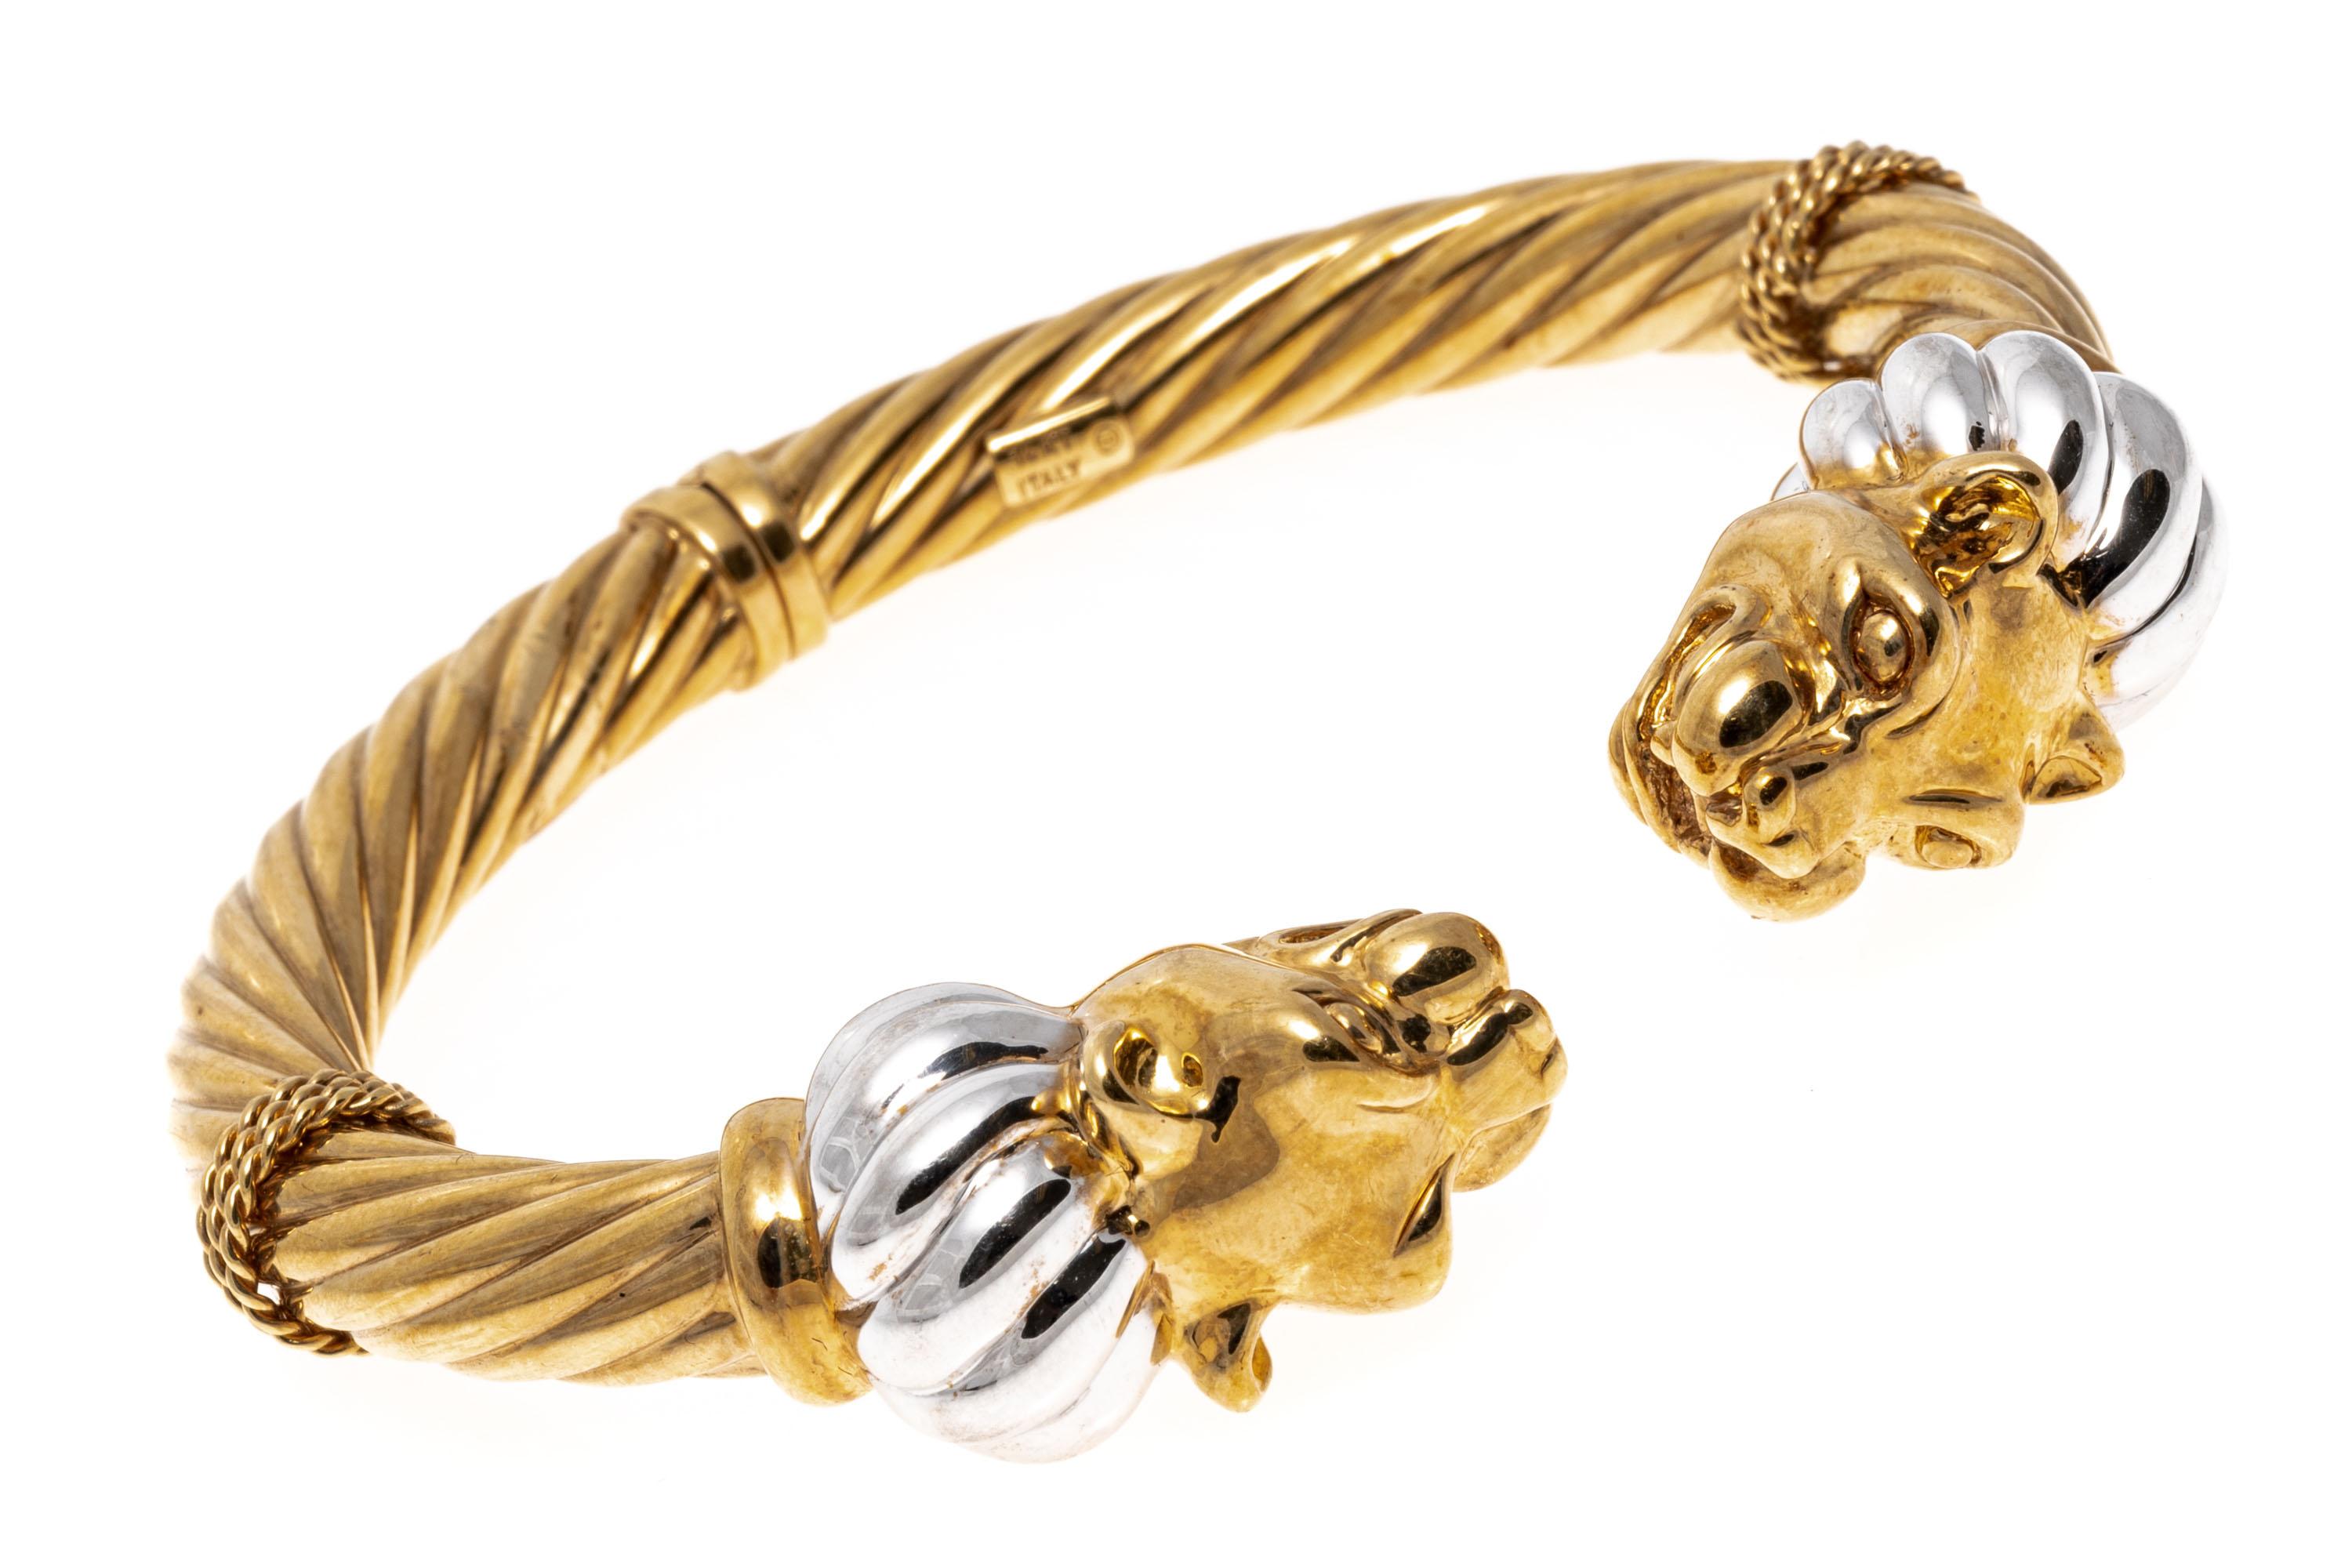 14k Two-Tone Facing Panther Head Twisted Hinged Cuff Bracelet
This eye-catching bracelet is a twisted hinged cuff featuring facing double panther heads, with a twisted white ribbed ruff.
Marks: 14k
Dimensions: 2 1/2